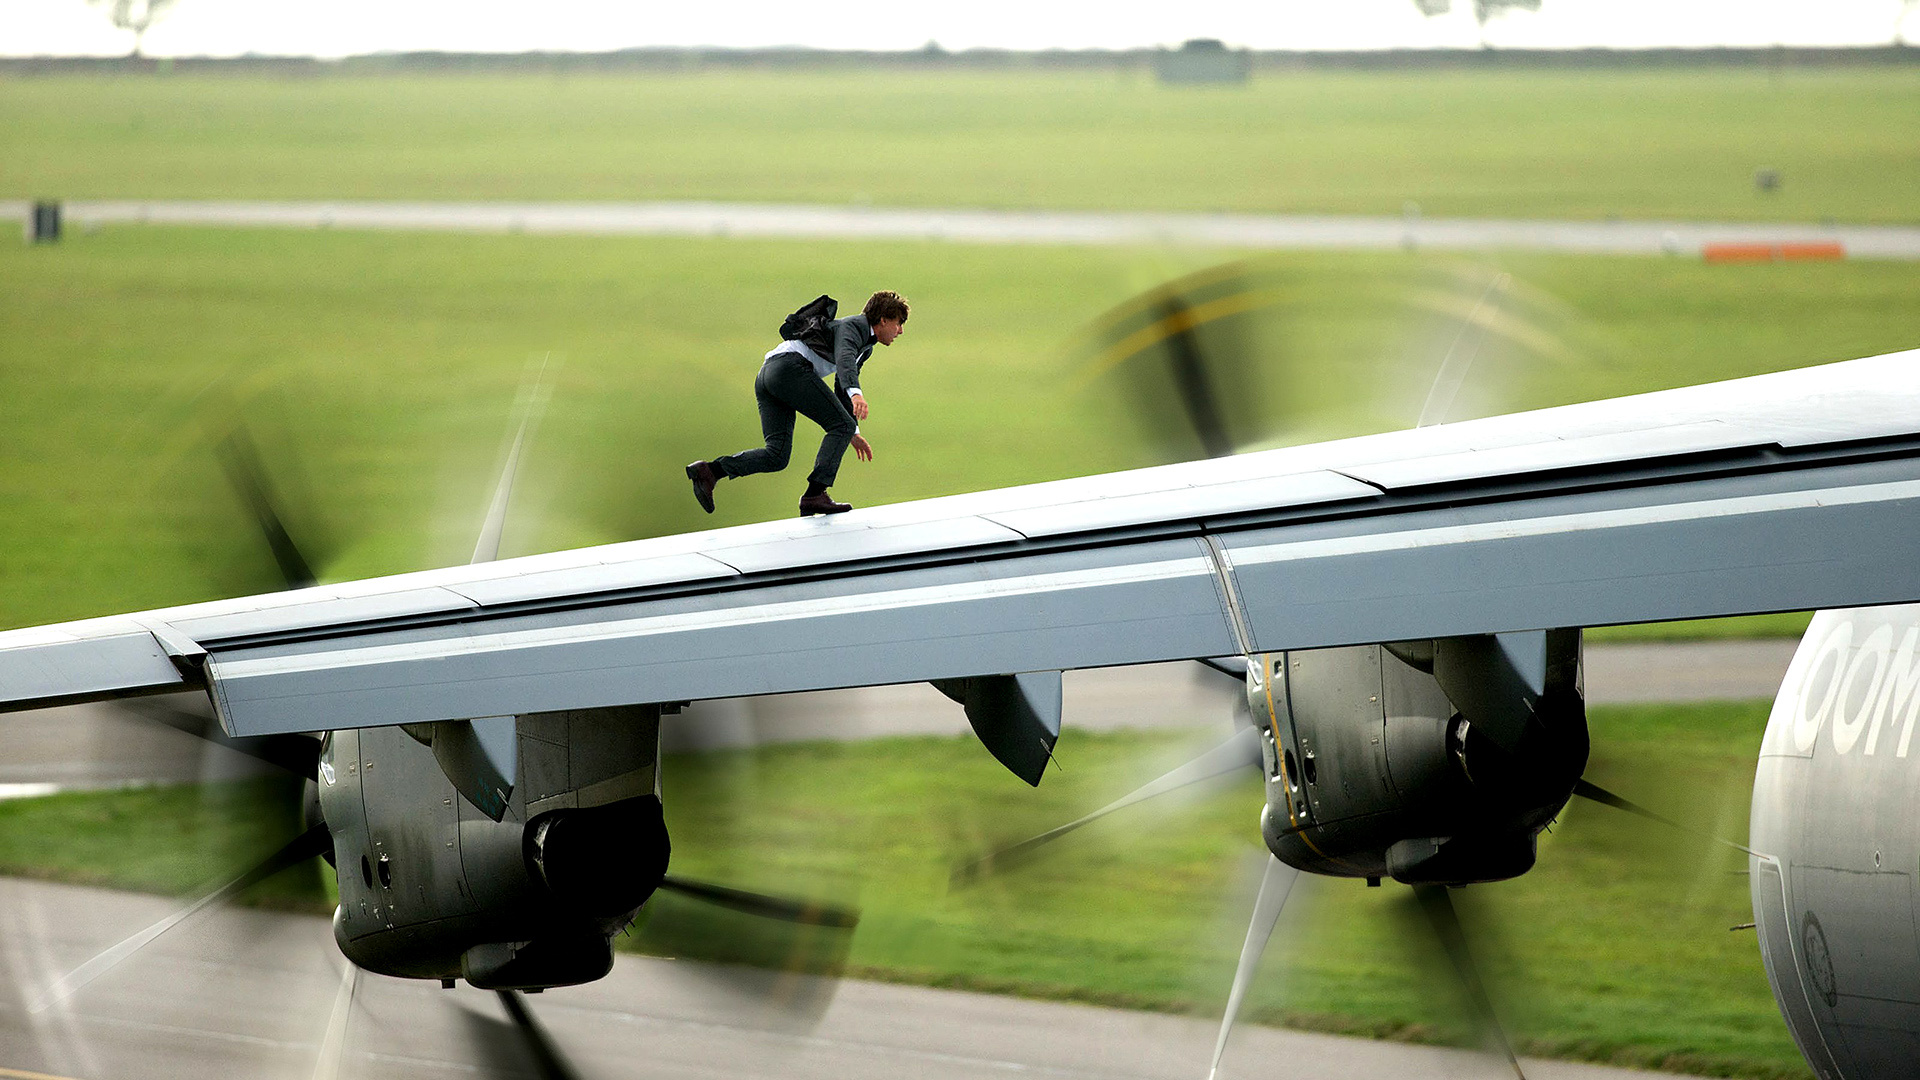 Mission Impossible, Rogue Nation, HD wallpaper, Background image, 1920x1080 Full HD Desktop